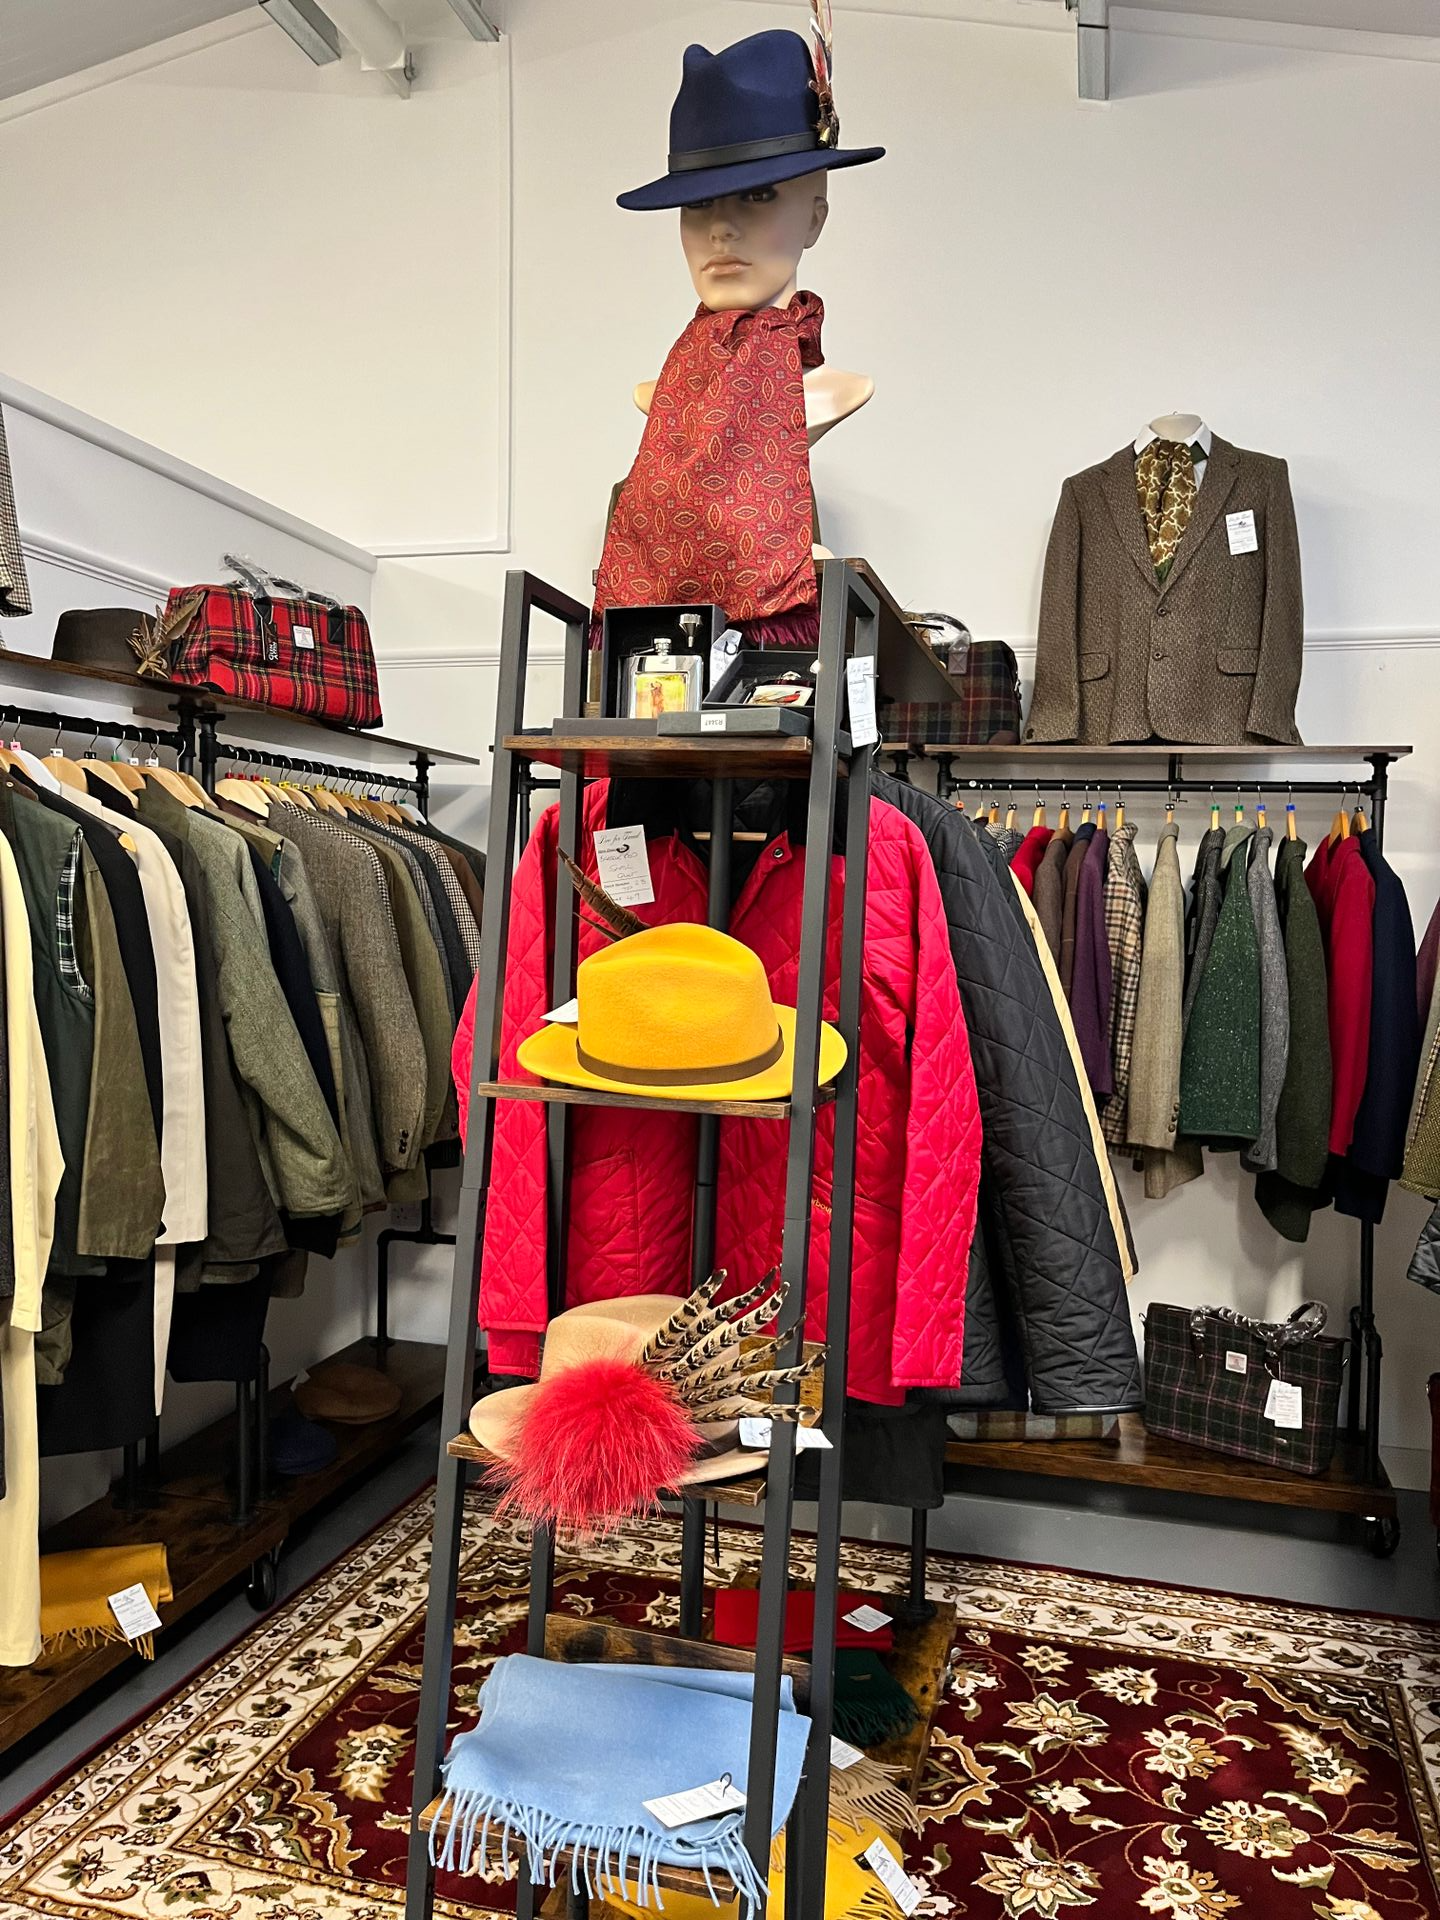 Visit Live for Tweed, within Top Dog Antiques Centre